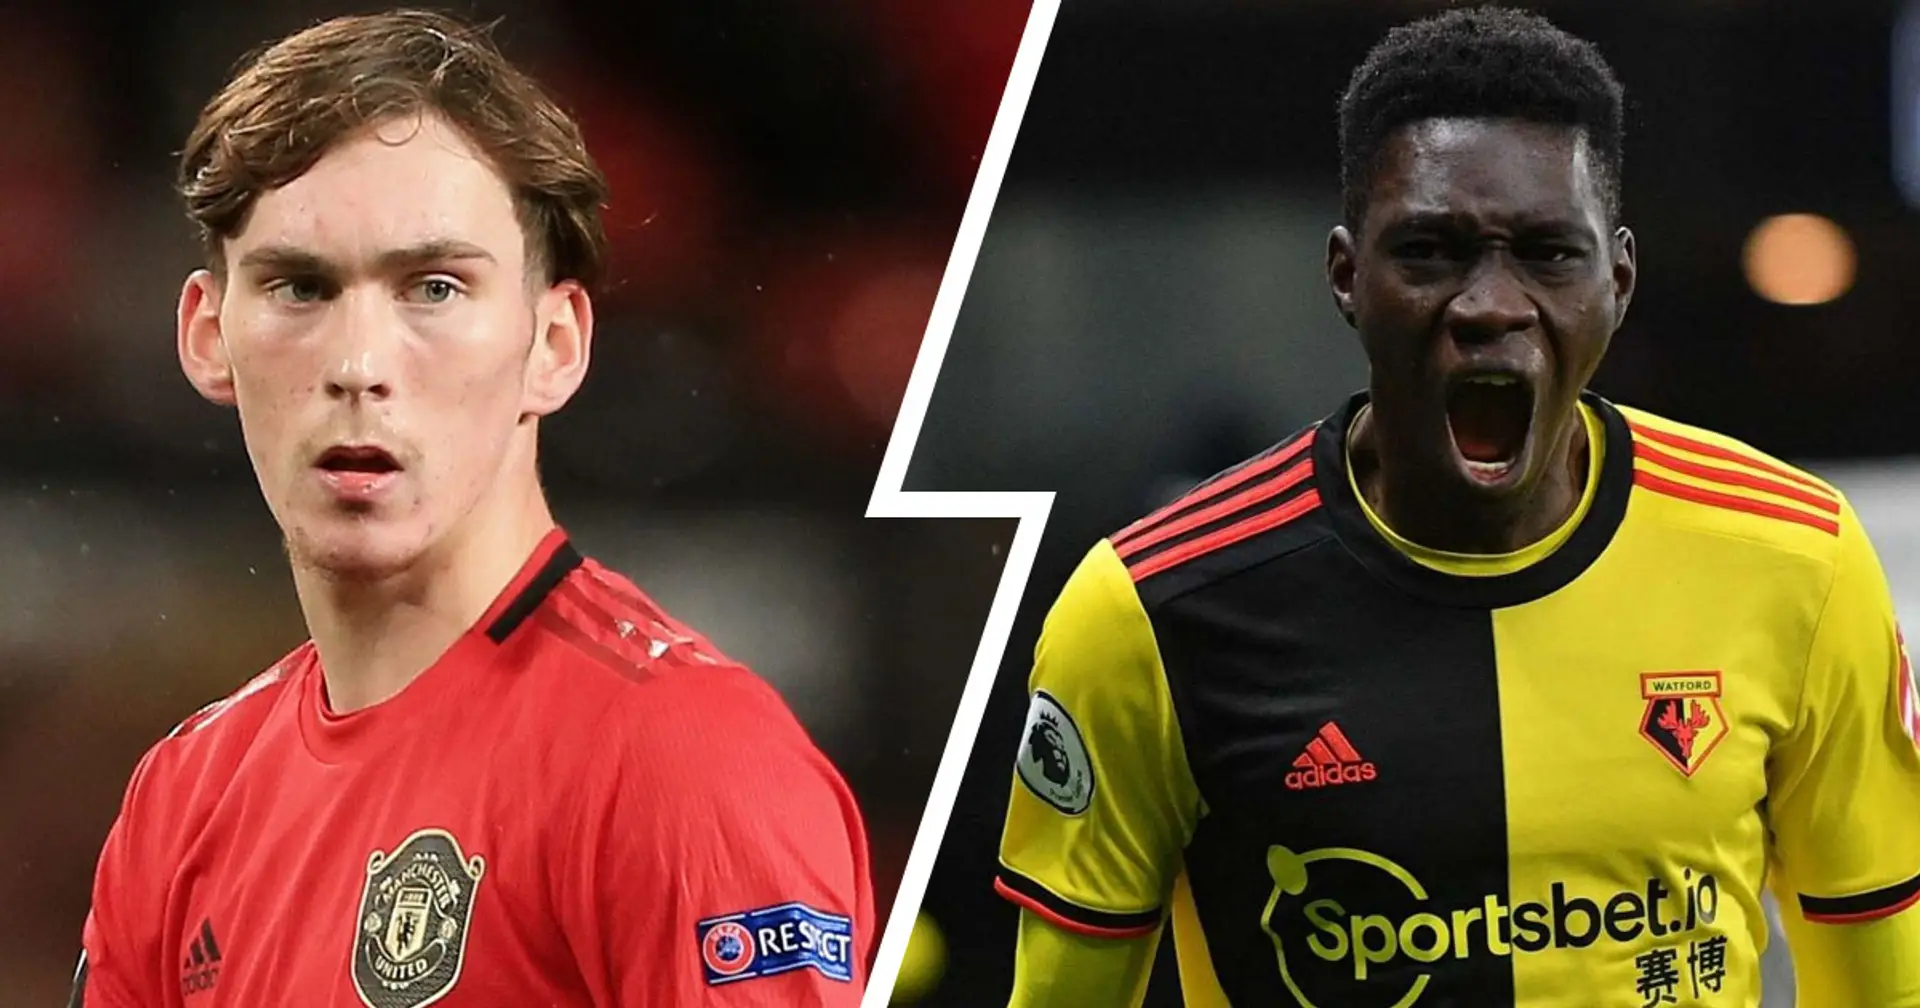 ‘Sarr incoming?’: United fans optimistic about chances of signing winger after Garner loaned to Watford